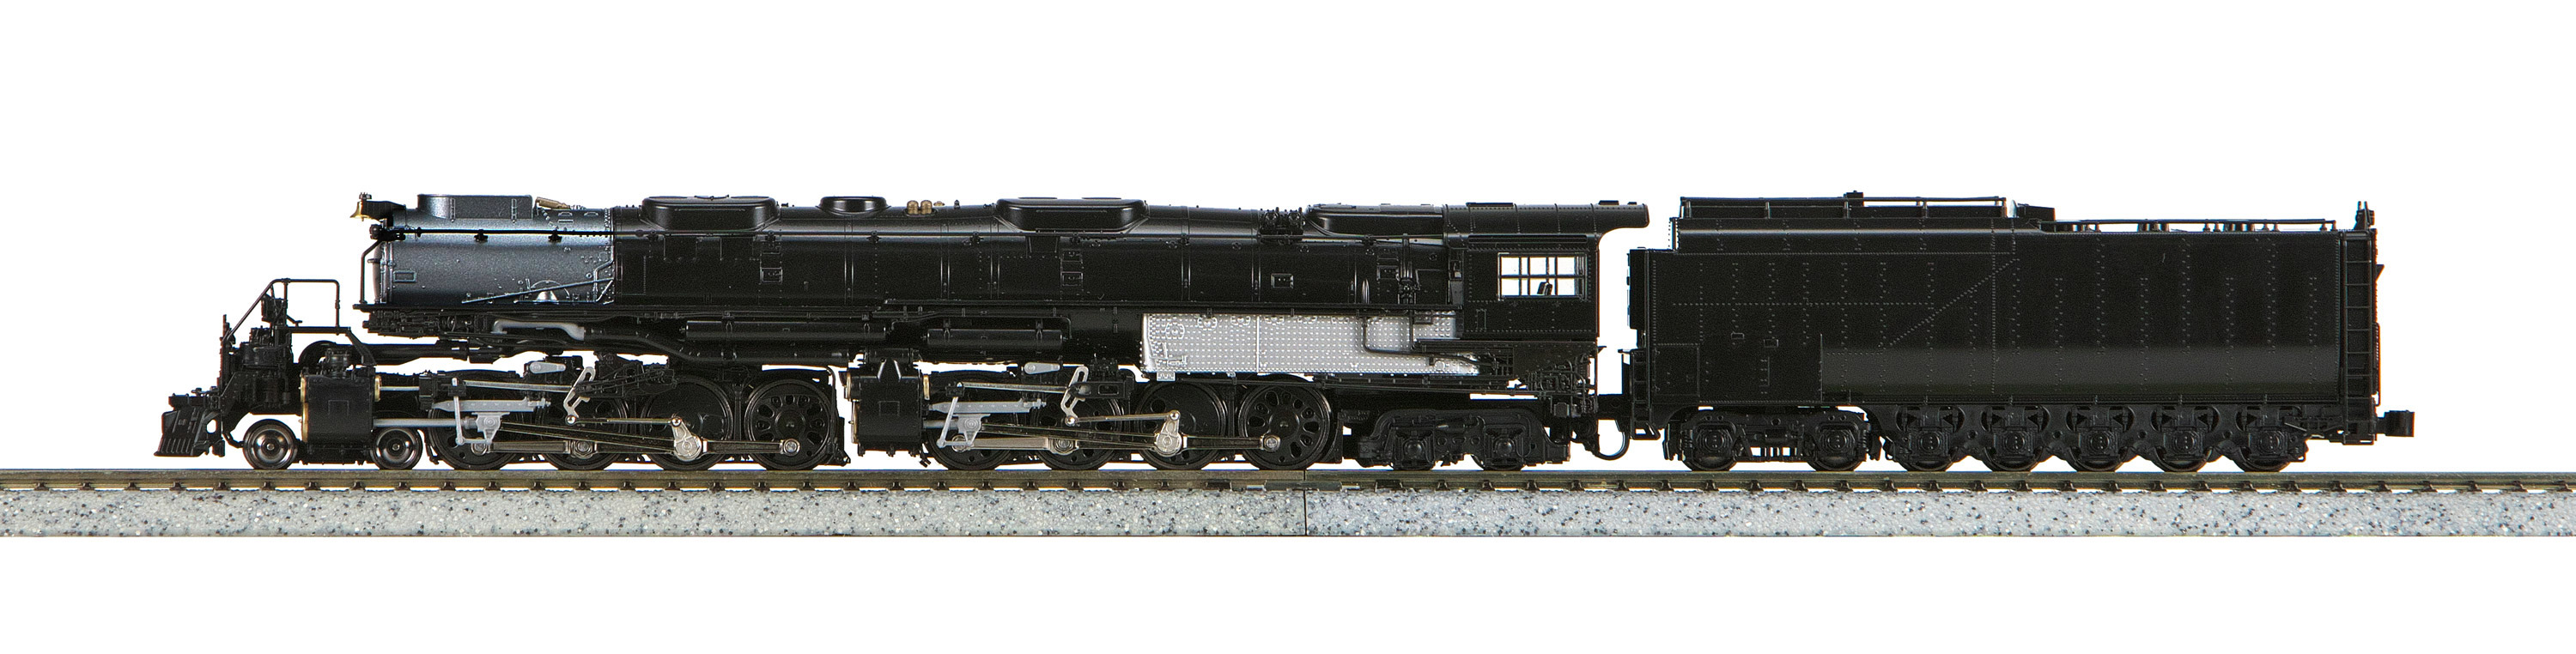 Kato N 126-4014 DC Version Union Pacific 4-8-8-4 'Big Boy' Steam Locomotive with Oil Tender UP #4014